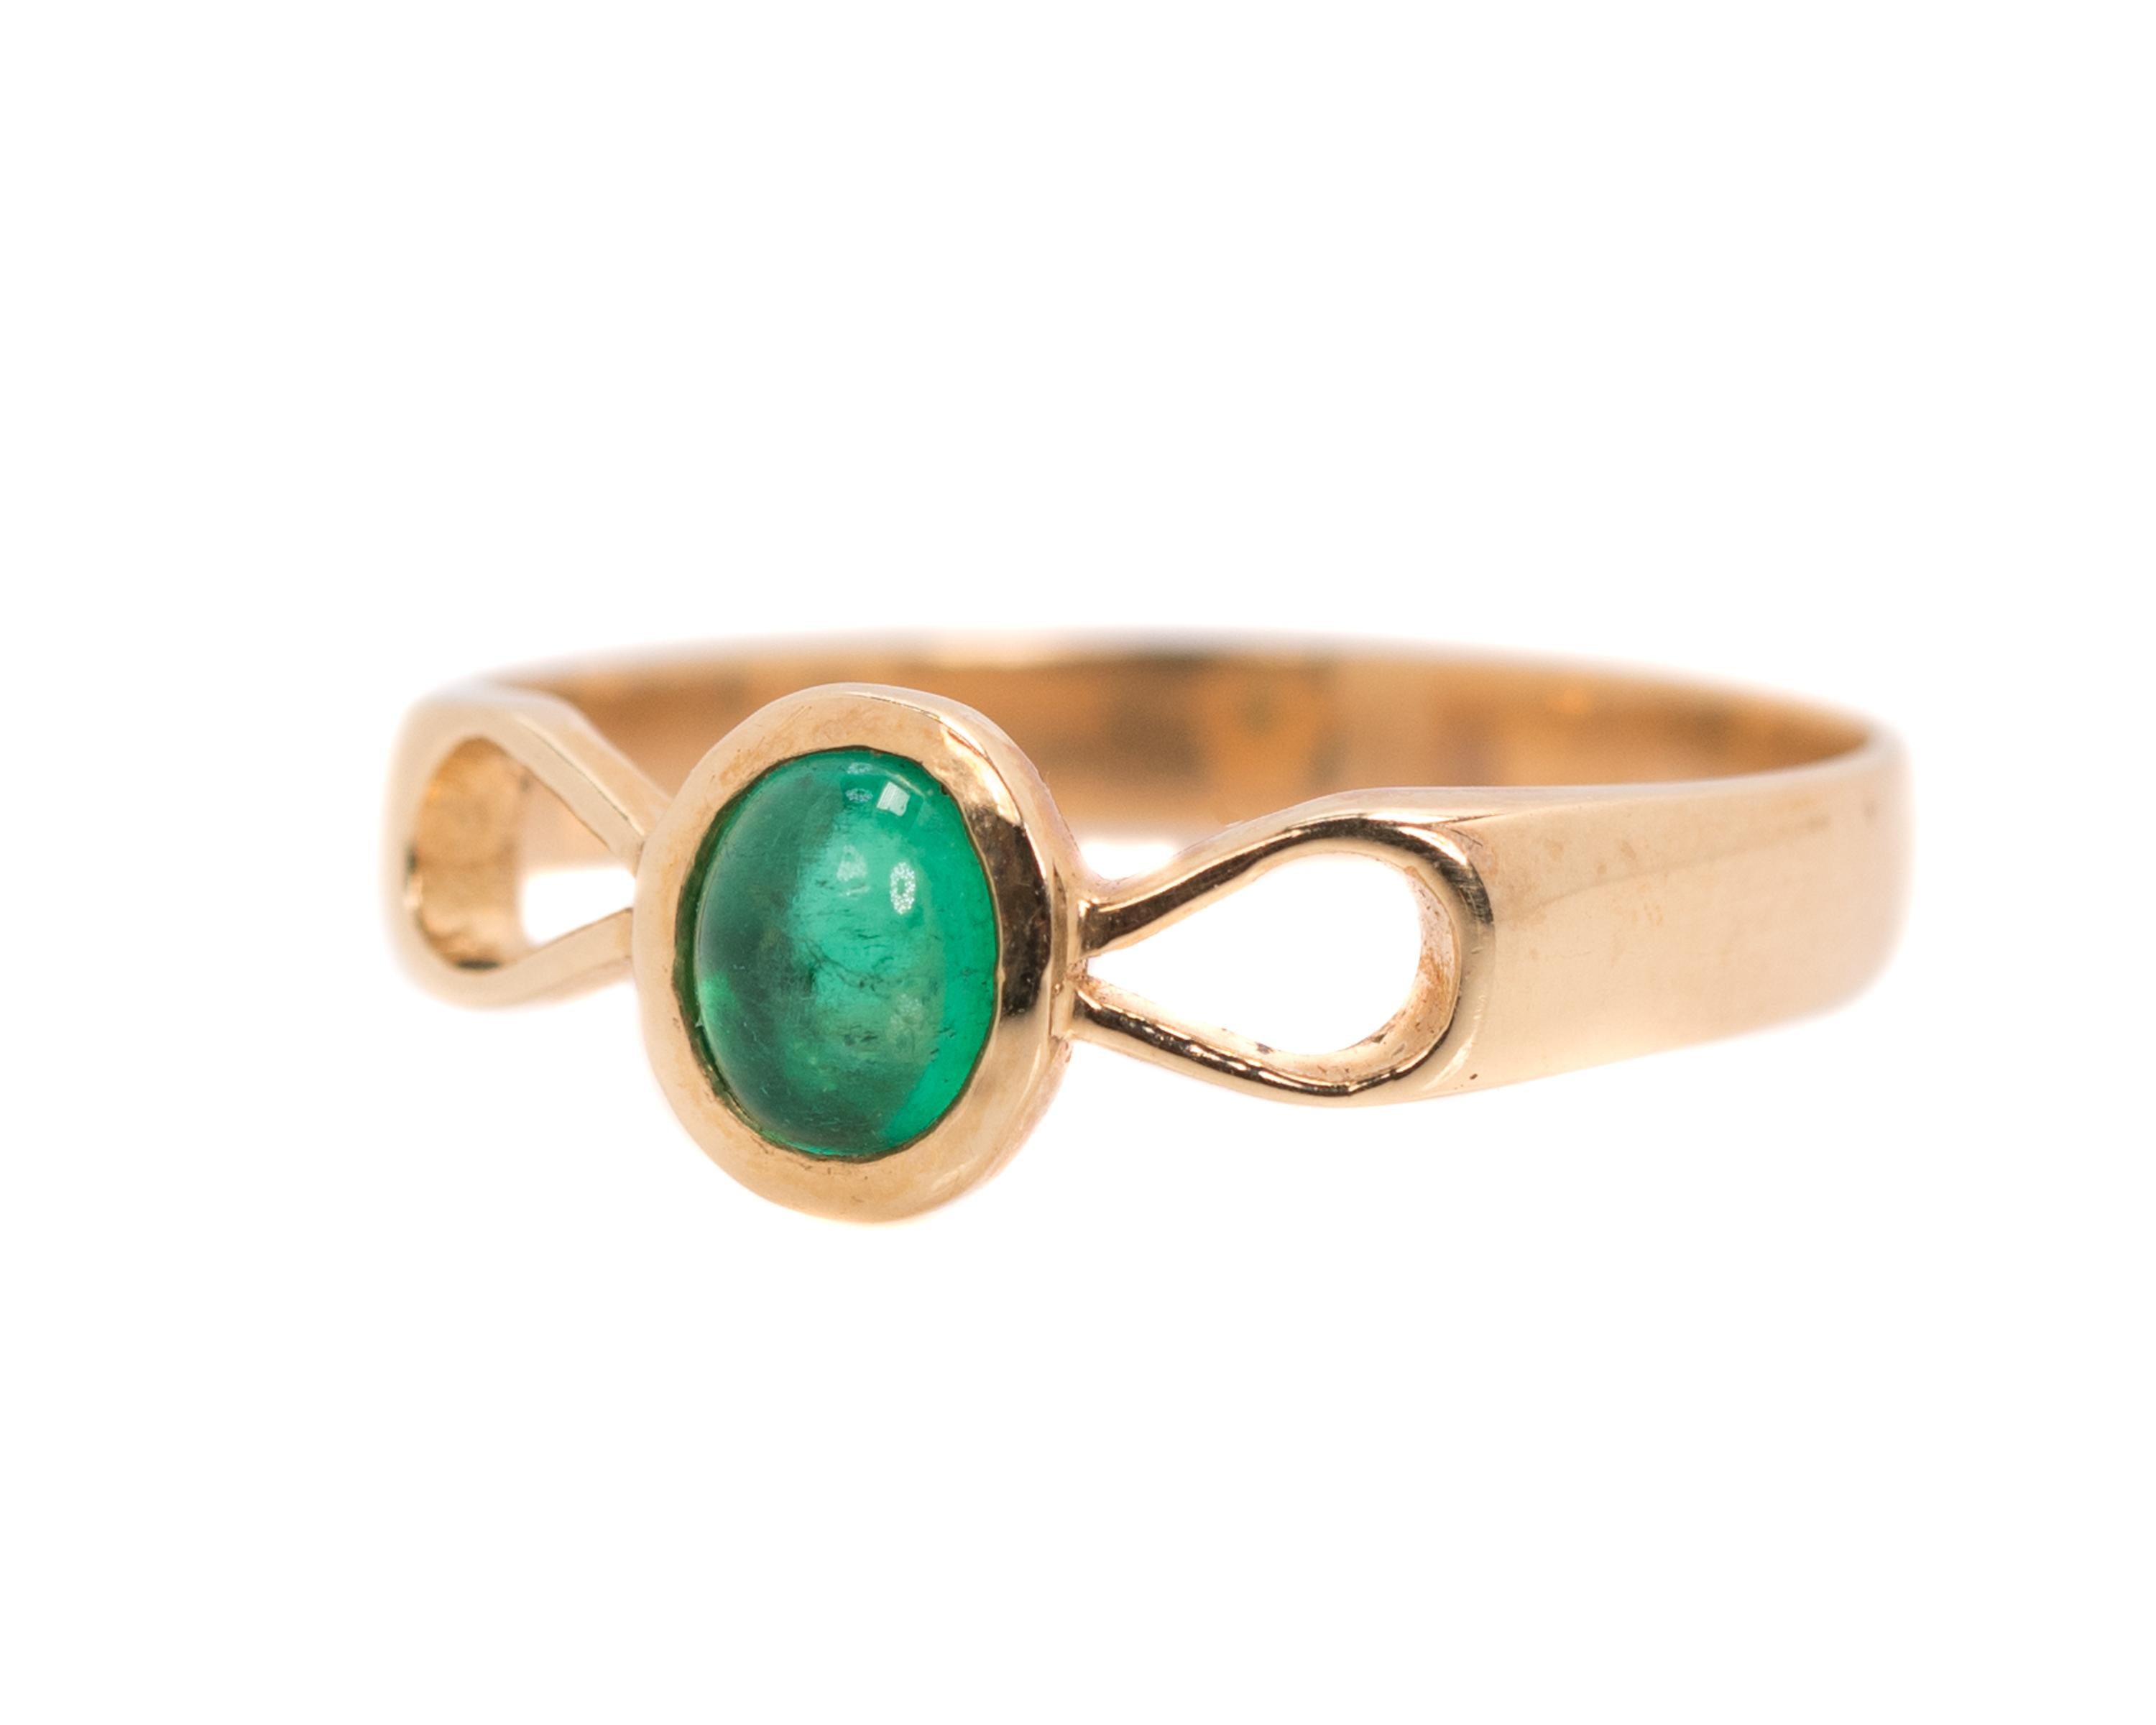 1950s Retro Emerald Cabochon Ring - 18 Karat Yellow Gold, Emerald

Features:
0.25 carat South American Emerald oval cabochon
18 Karat Yellow Gold setting
3 millimeter shank width
Bow motif with open teardrop shapes flanking center stone

Finger to